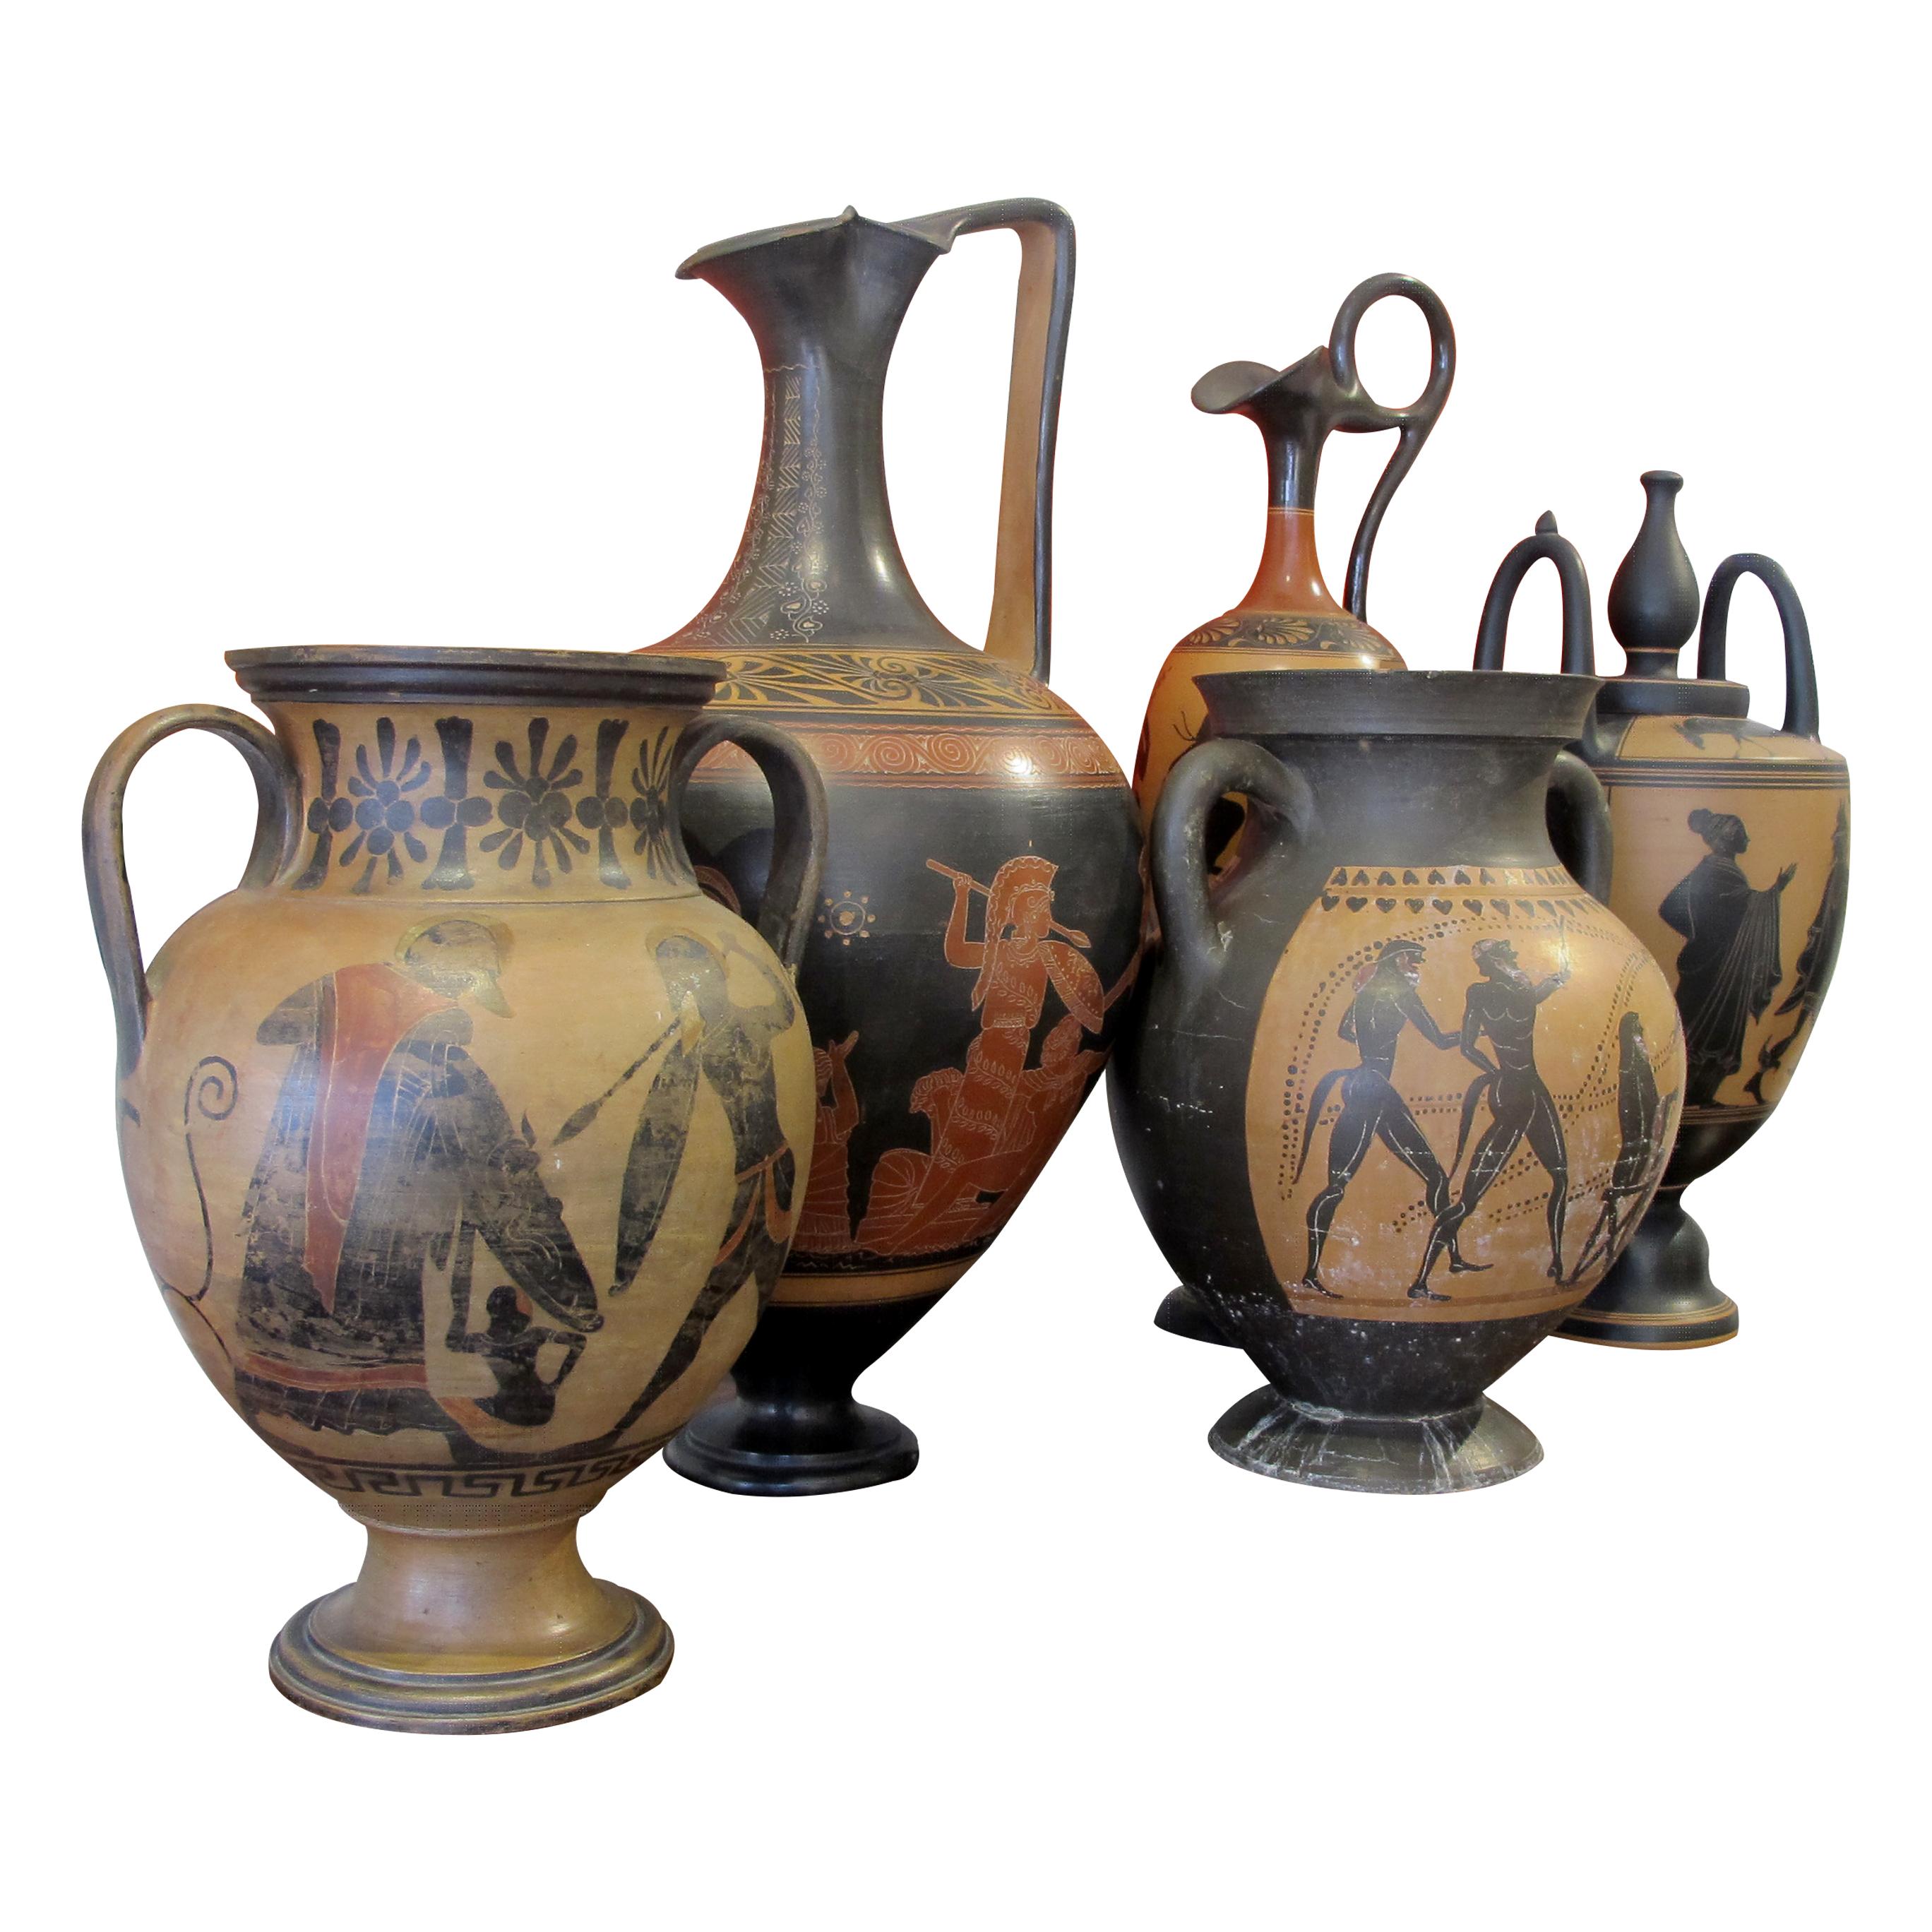 This is a magnificent set of 5 of highly decorative early 20th Century Etruscan style Lekythos vases also known as black-figure pottery painting. Figures and ornaments were painted on the vessel's body using shapes and colours reminiscent of